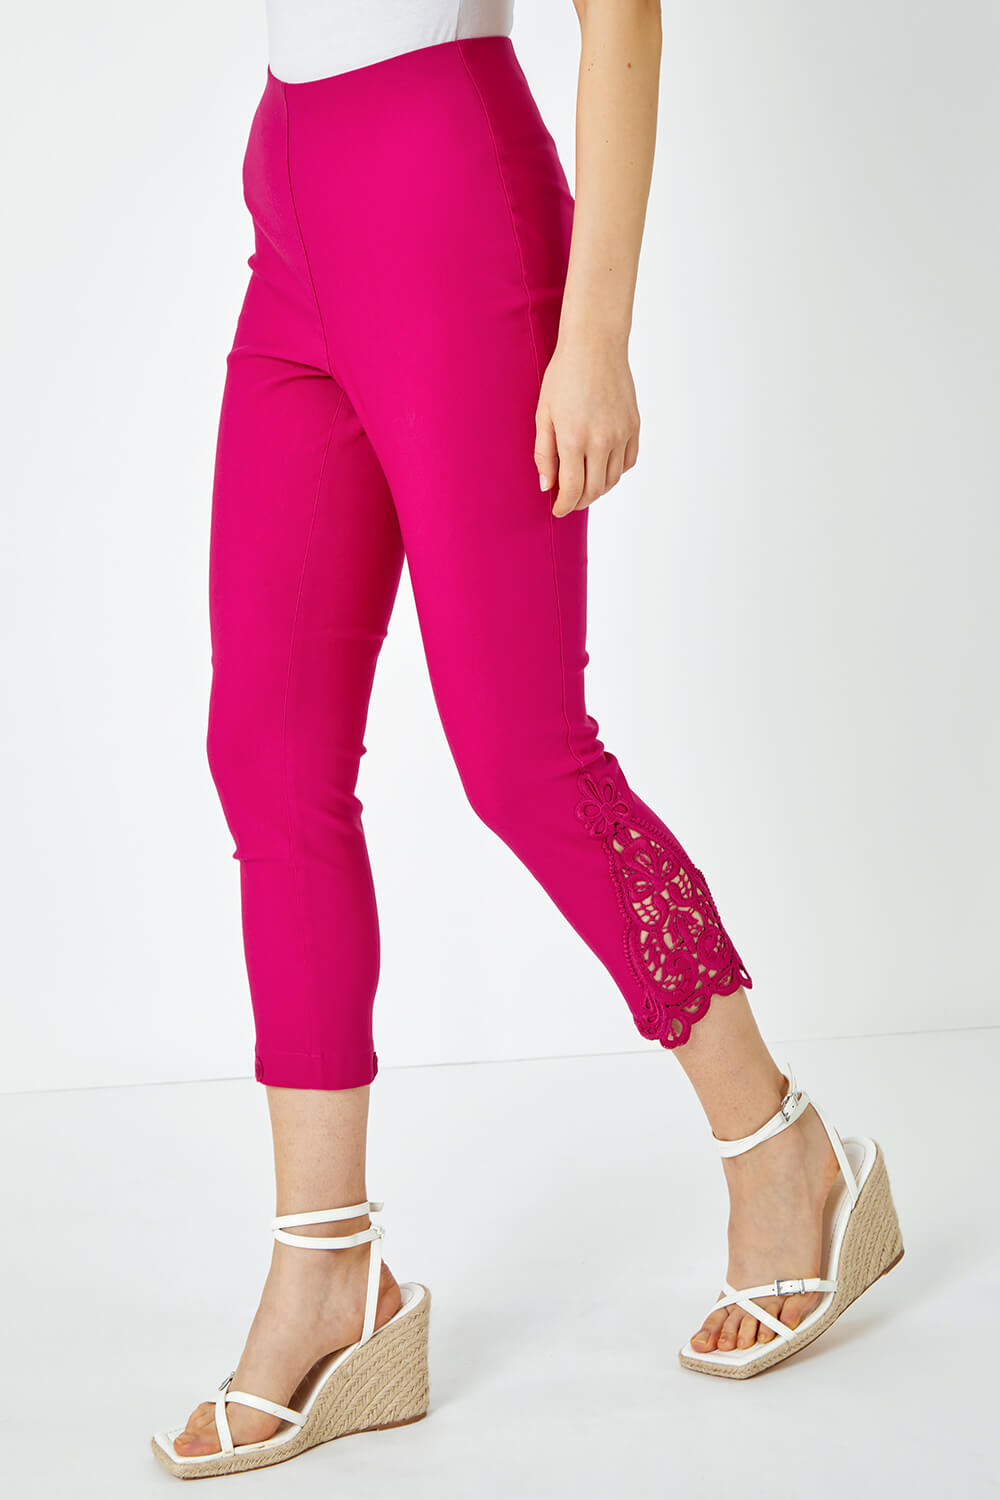 CERISE Lace Insert Crop Stretch Trousers, Image 4 of 5